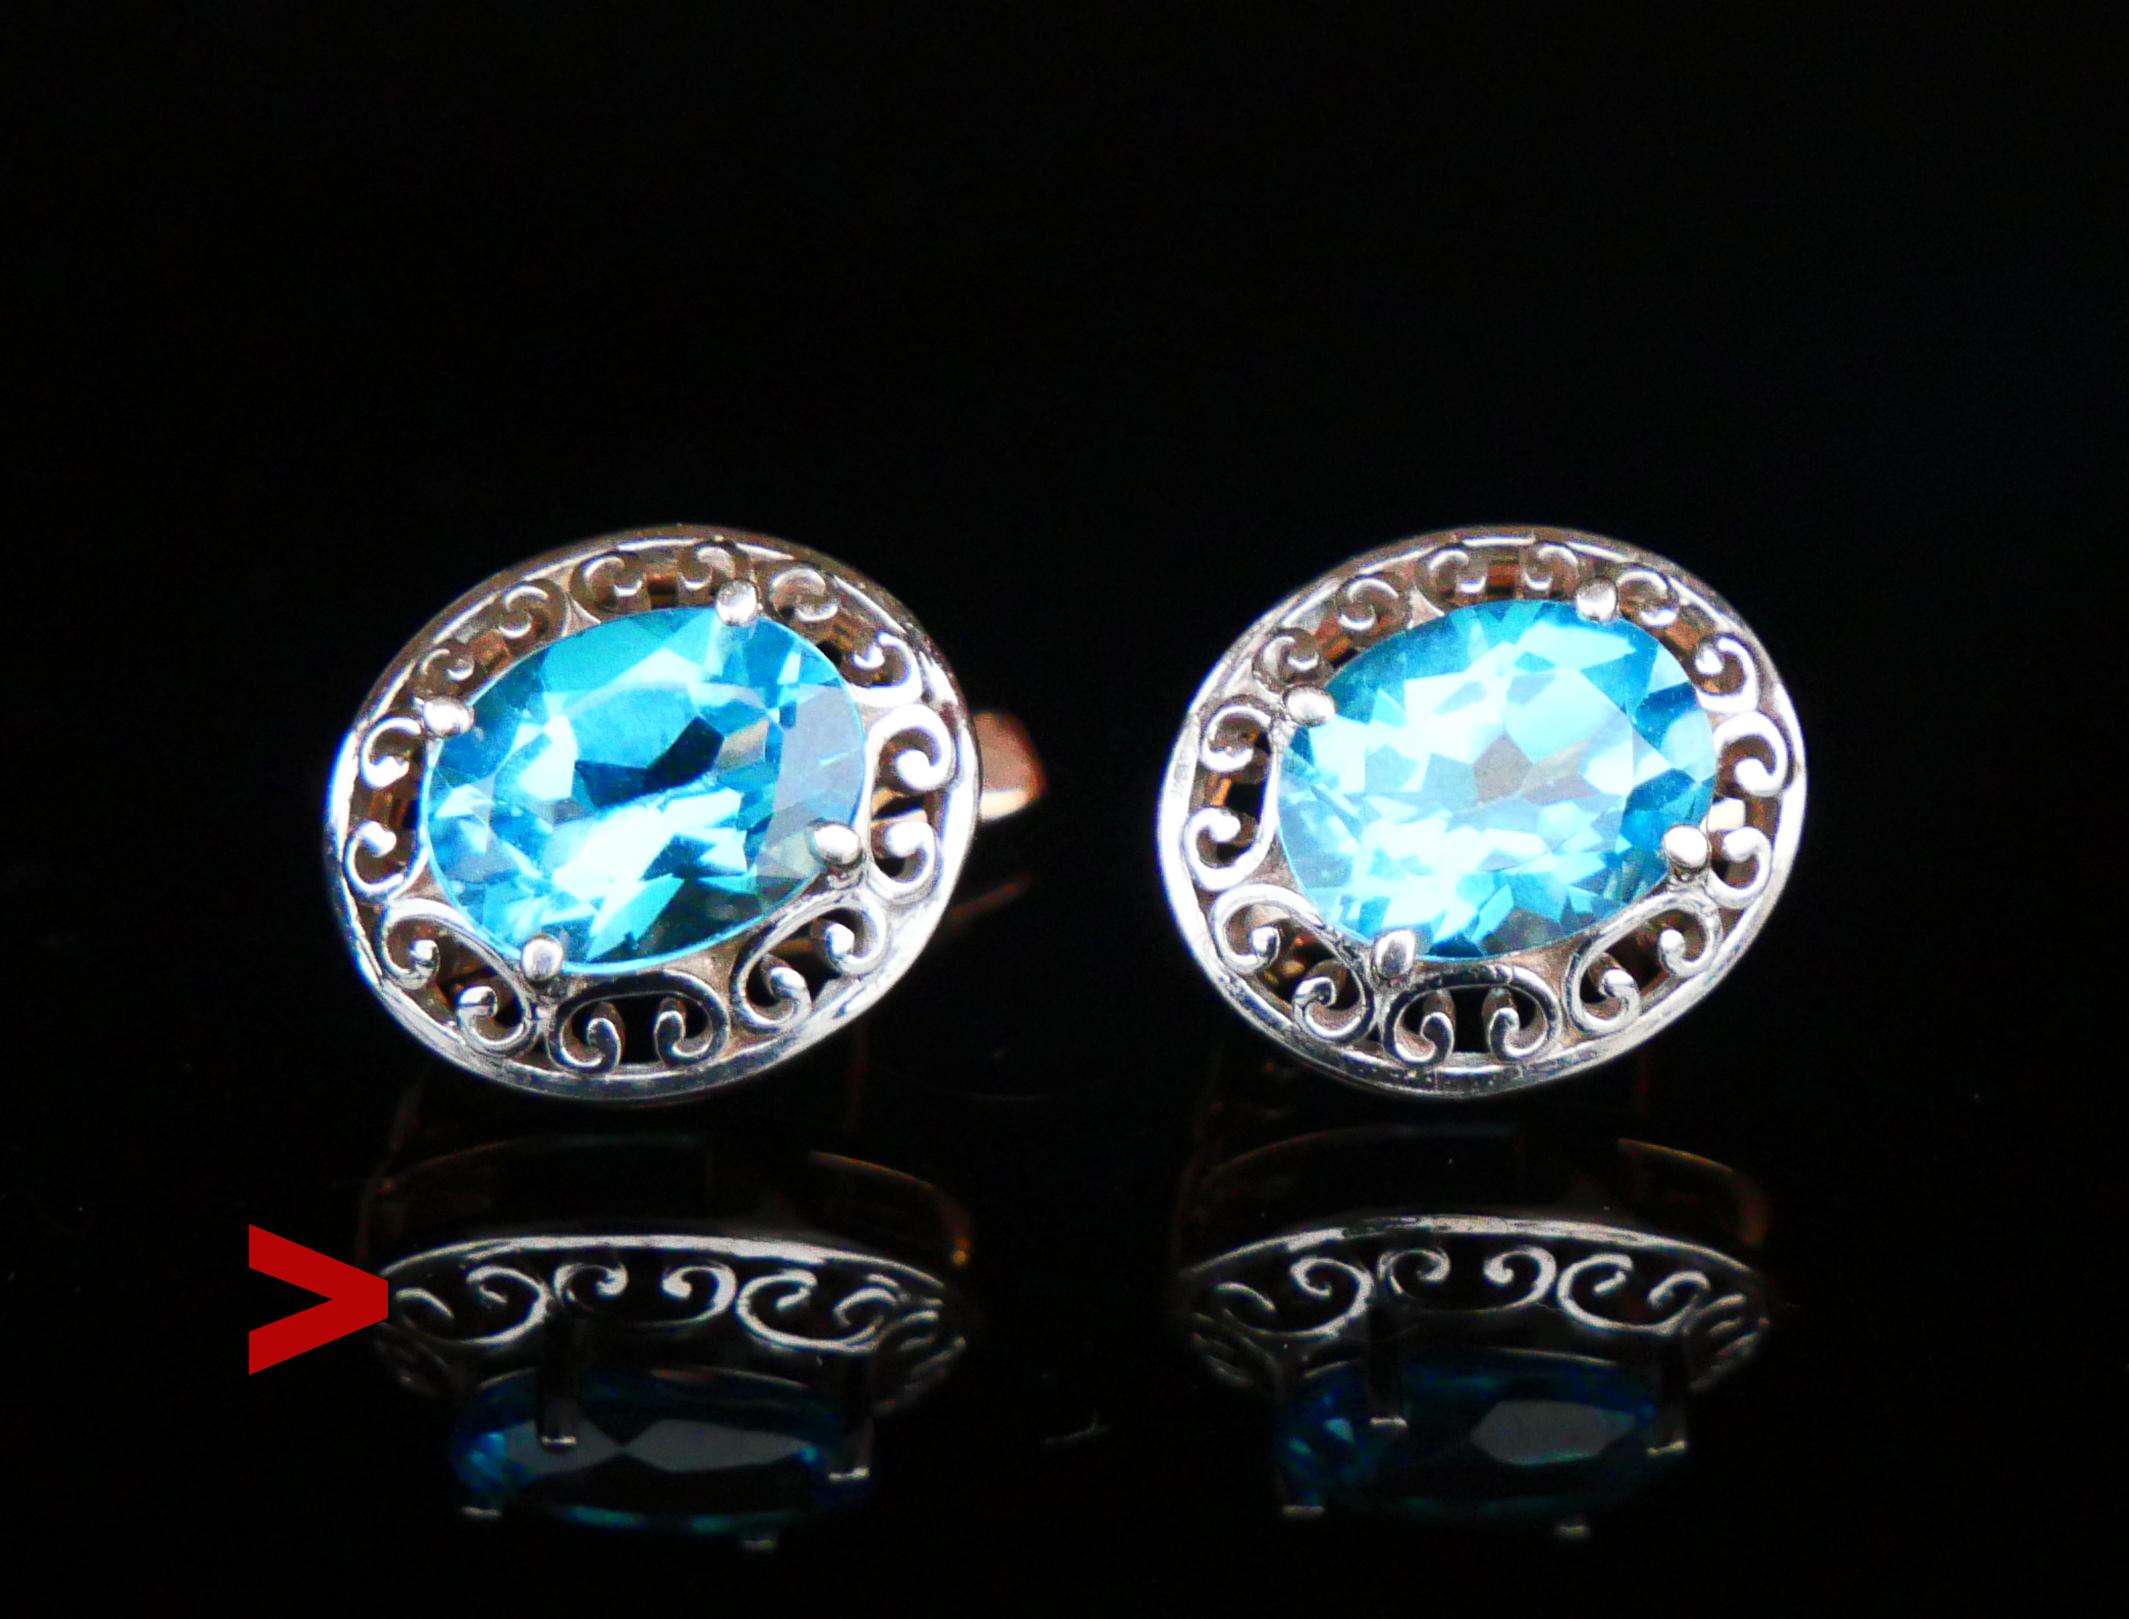 A pair of Russian Soviet period Huggies Earrings in solid 14K Rose Gold with lining in 14K White Gold holding oval cut Topaz settings 9mm x 7 mm /ca. 2ct each.

Each earring is marked with late Soviet Union period Russian 583 and maker's